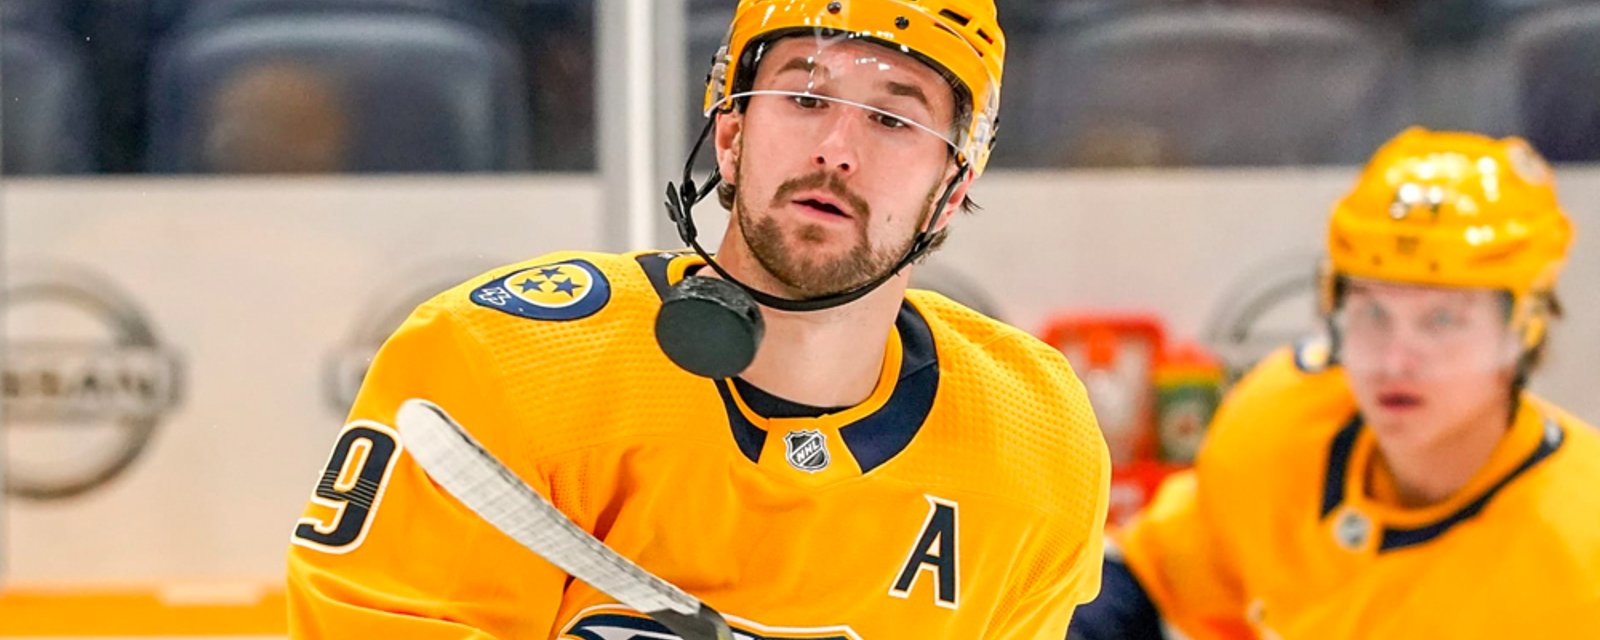 Report: No rebuild for Preds as they double down on their core players